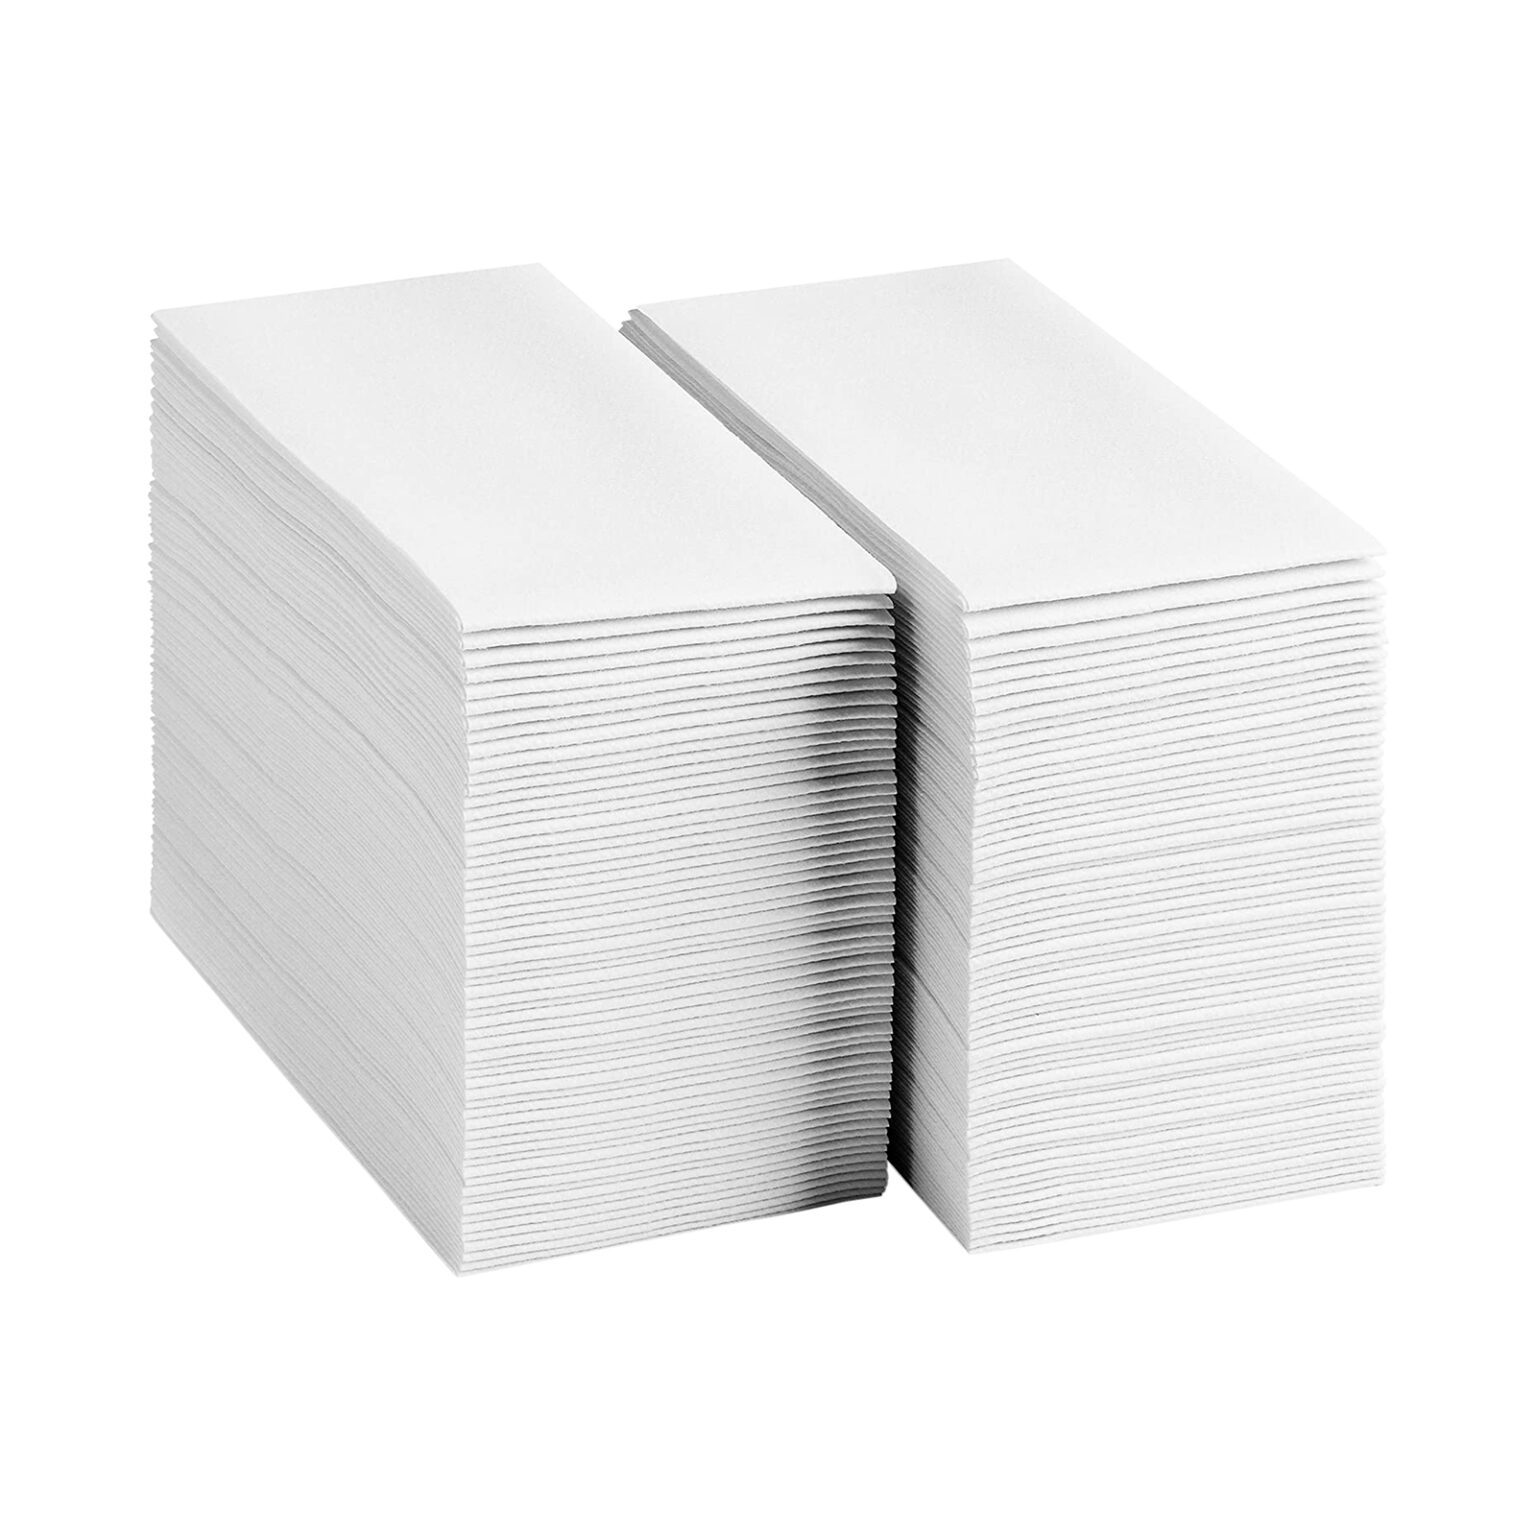 White-Premium-Paper-Quilted Napkins-8-Fold-2-Ply-Double-Stacked